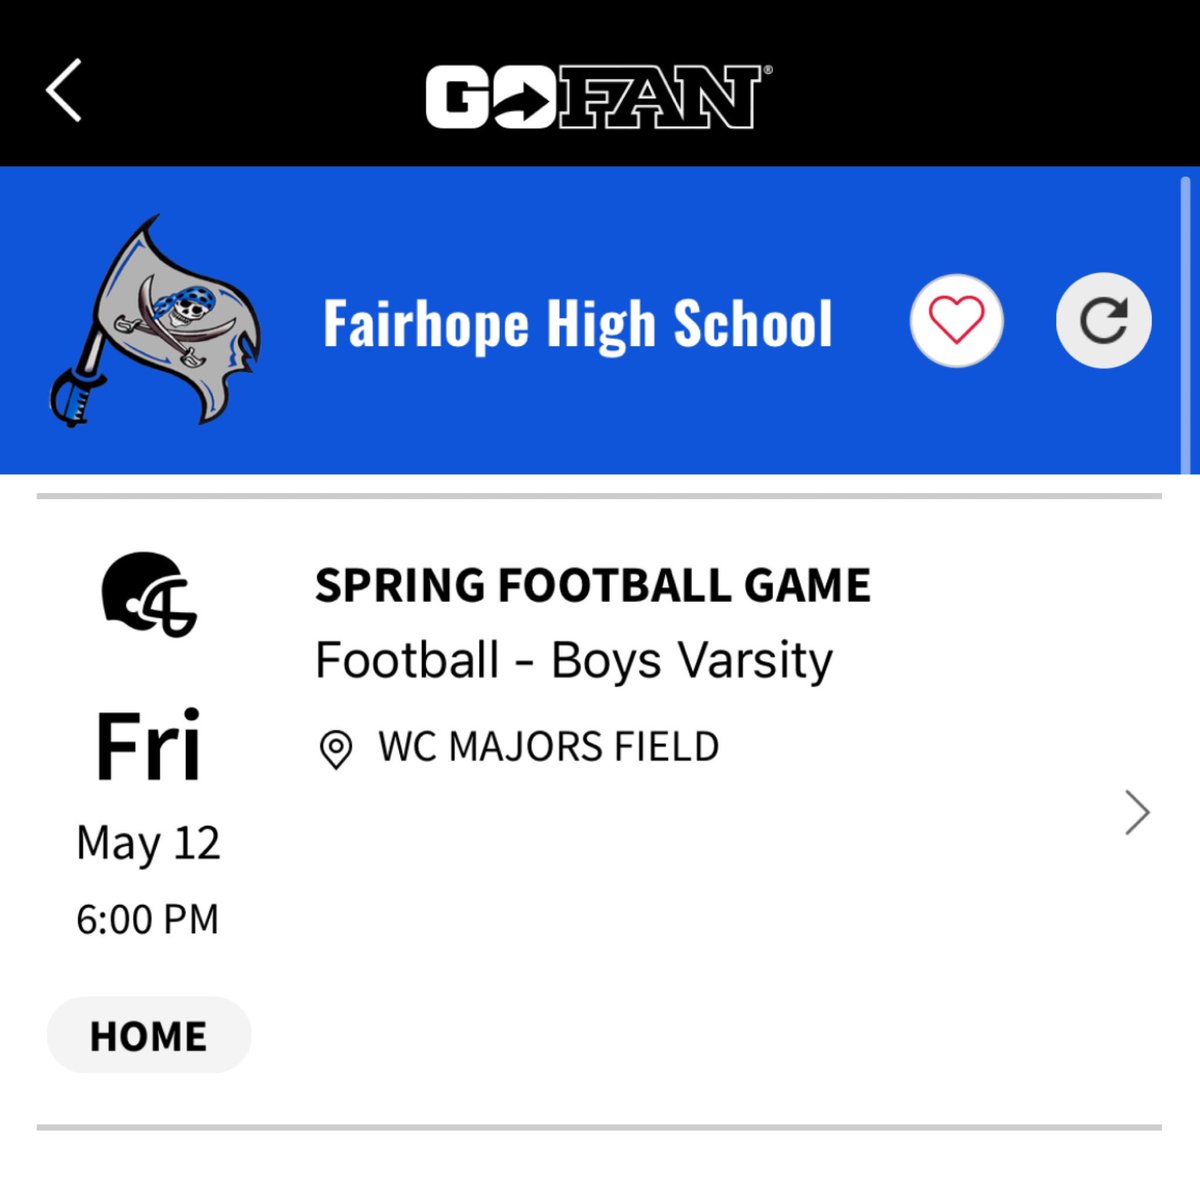 Panthers Football Fans! It’s time to get your tickets for the 2023 Spring Game at Fairhope next Friday, May 12th. Visit GoFan online or in the app and search for Fairhope High School. Scroll down to upcoming events and find the Spring Football Game (see the pic below). #WeGoula